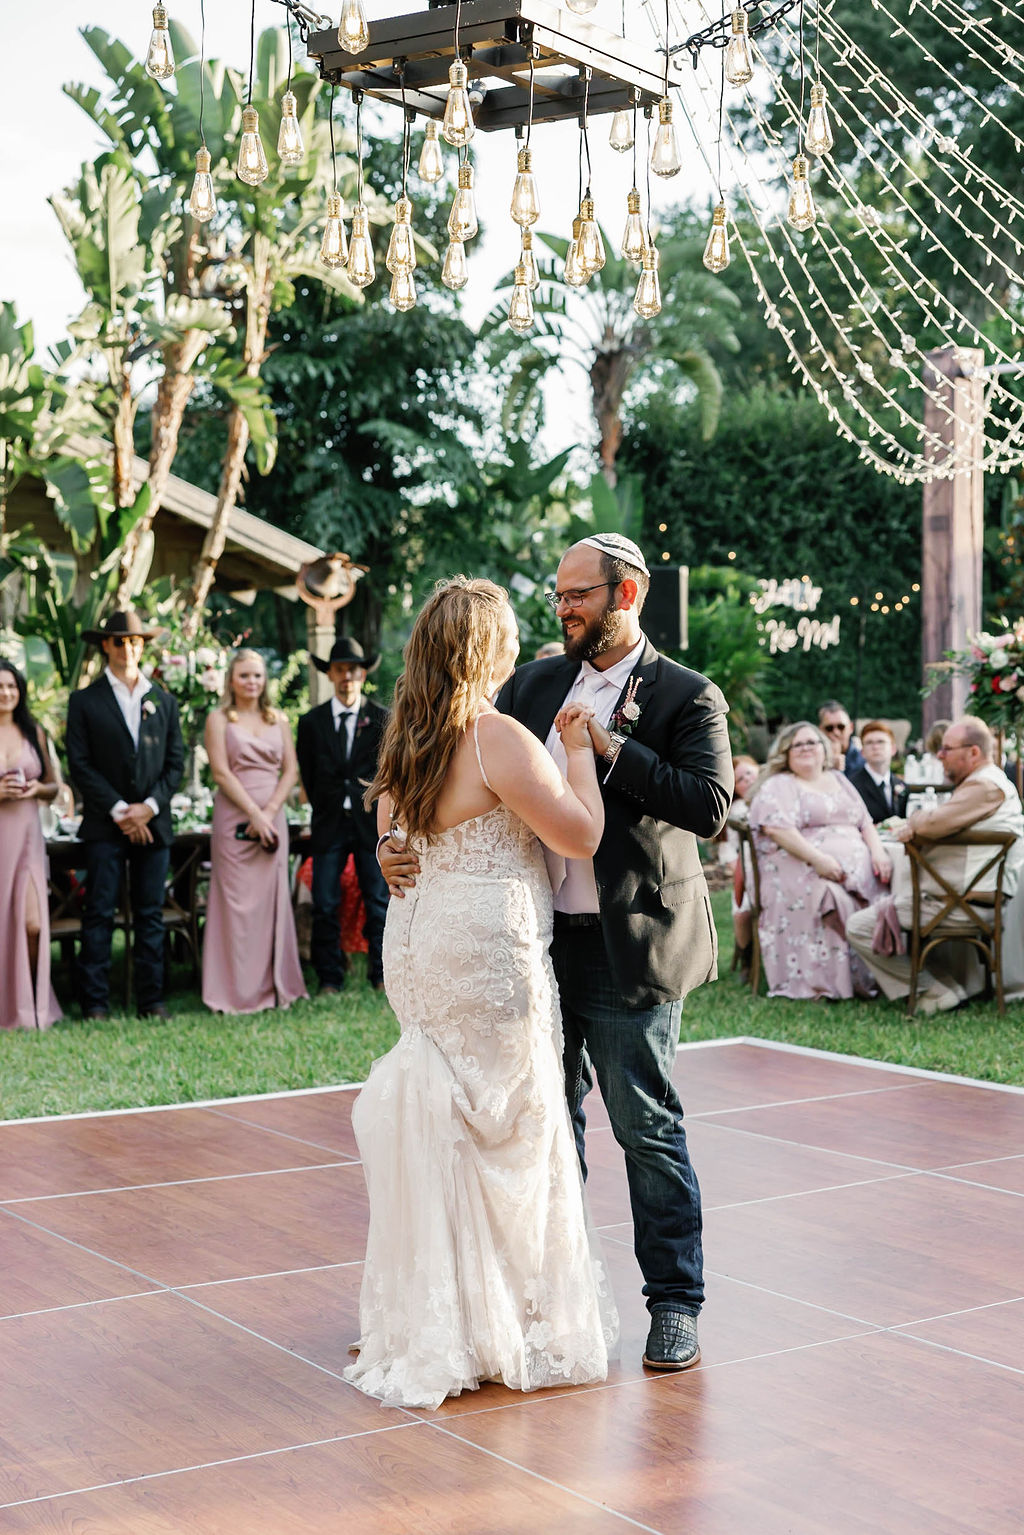 Ashley and Justin first dance as husband and wife